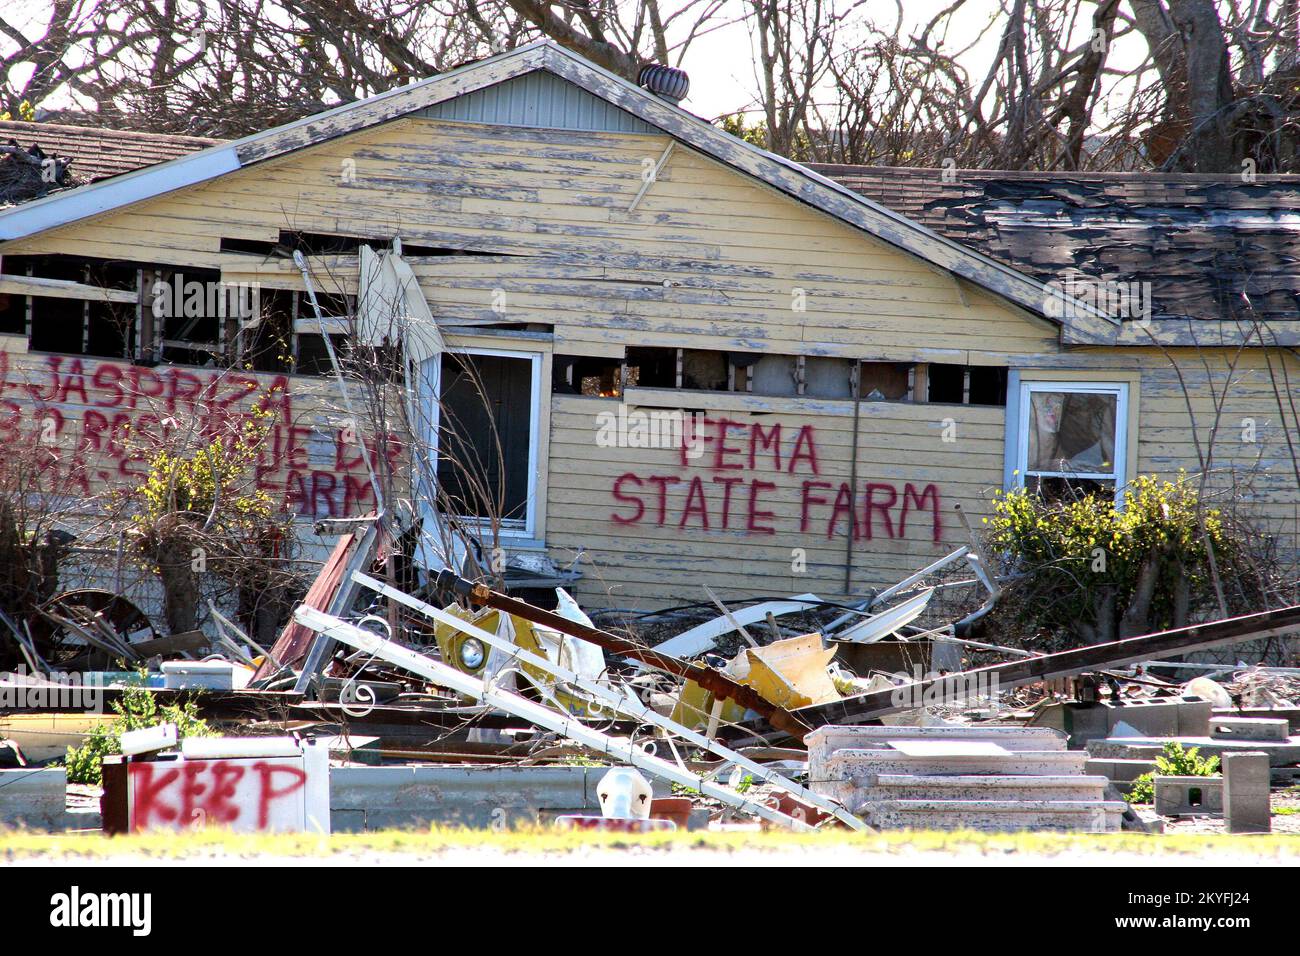 Hurricane Katrina] Buras, LA, October 25, 2005 - The eye of Hurricane  Katrina passed directly over this community. The water tower rests on top  of a house in the ruins of Plaquemine